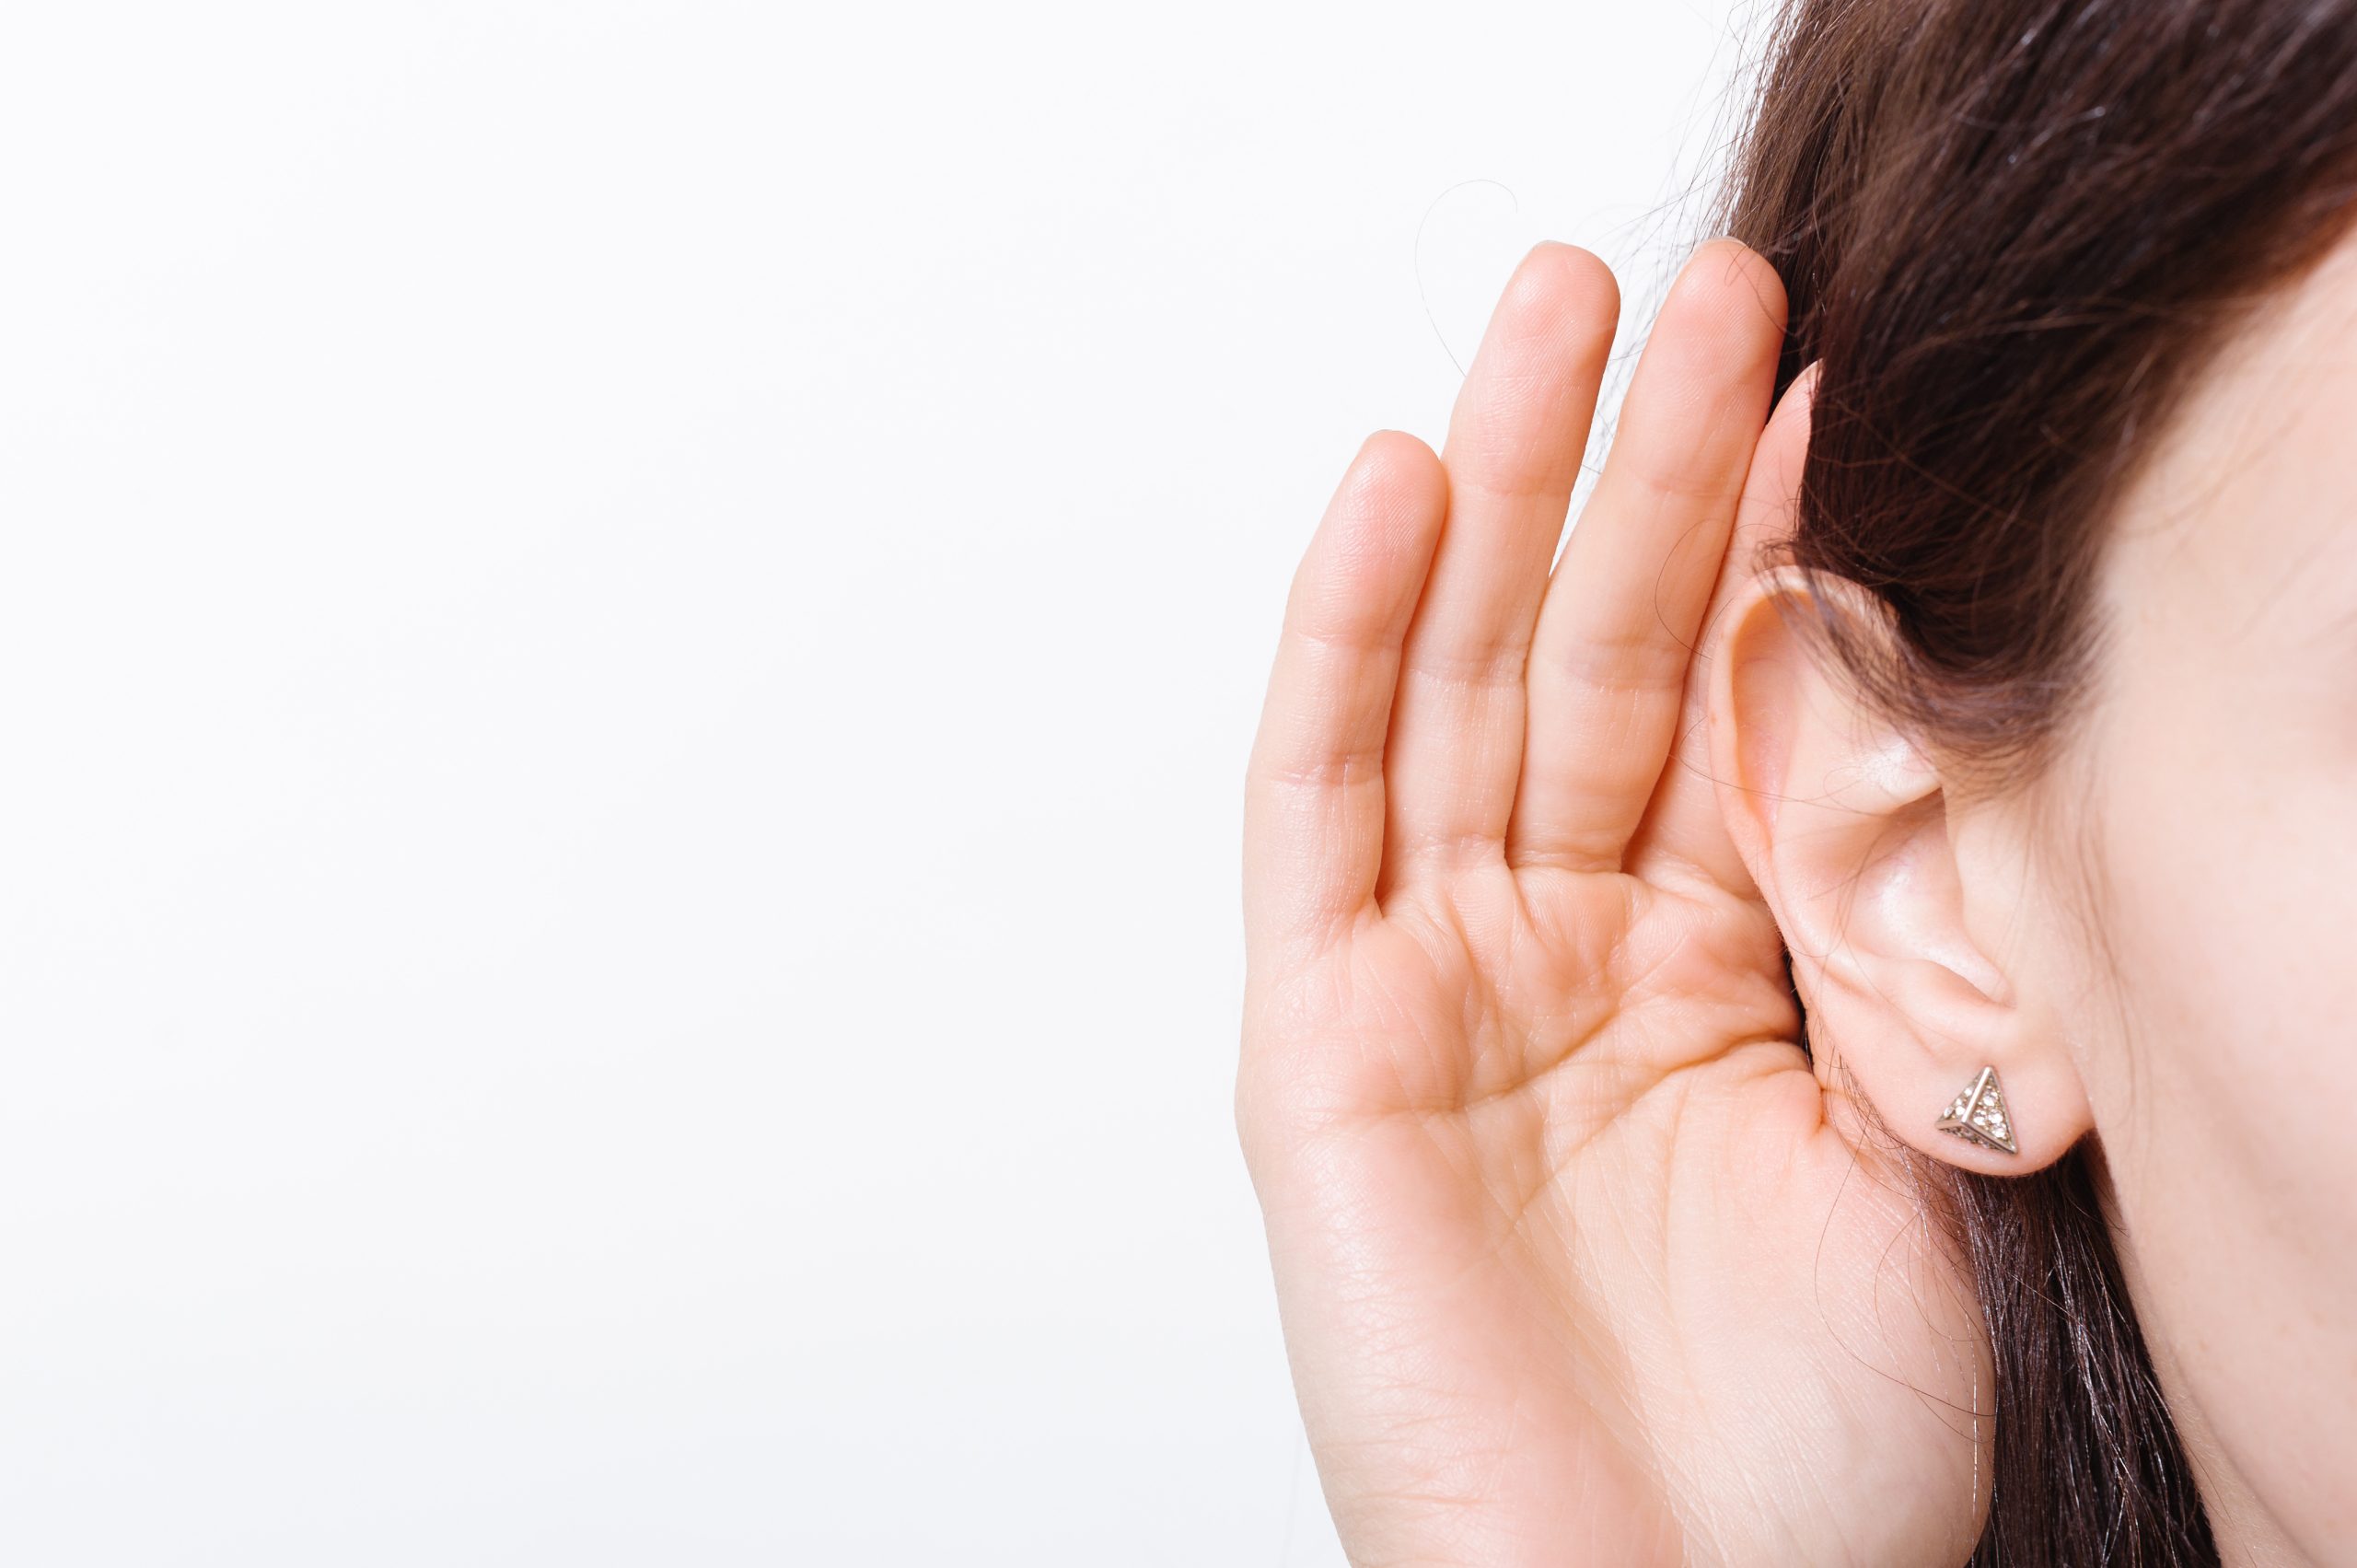 How can I prevent my hearing loss from getting worse?